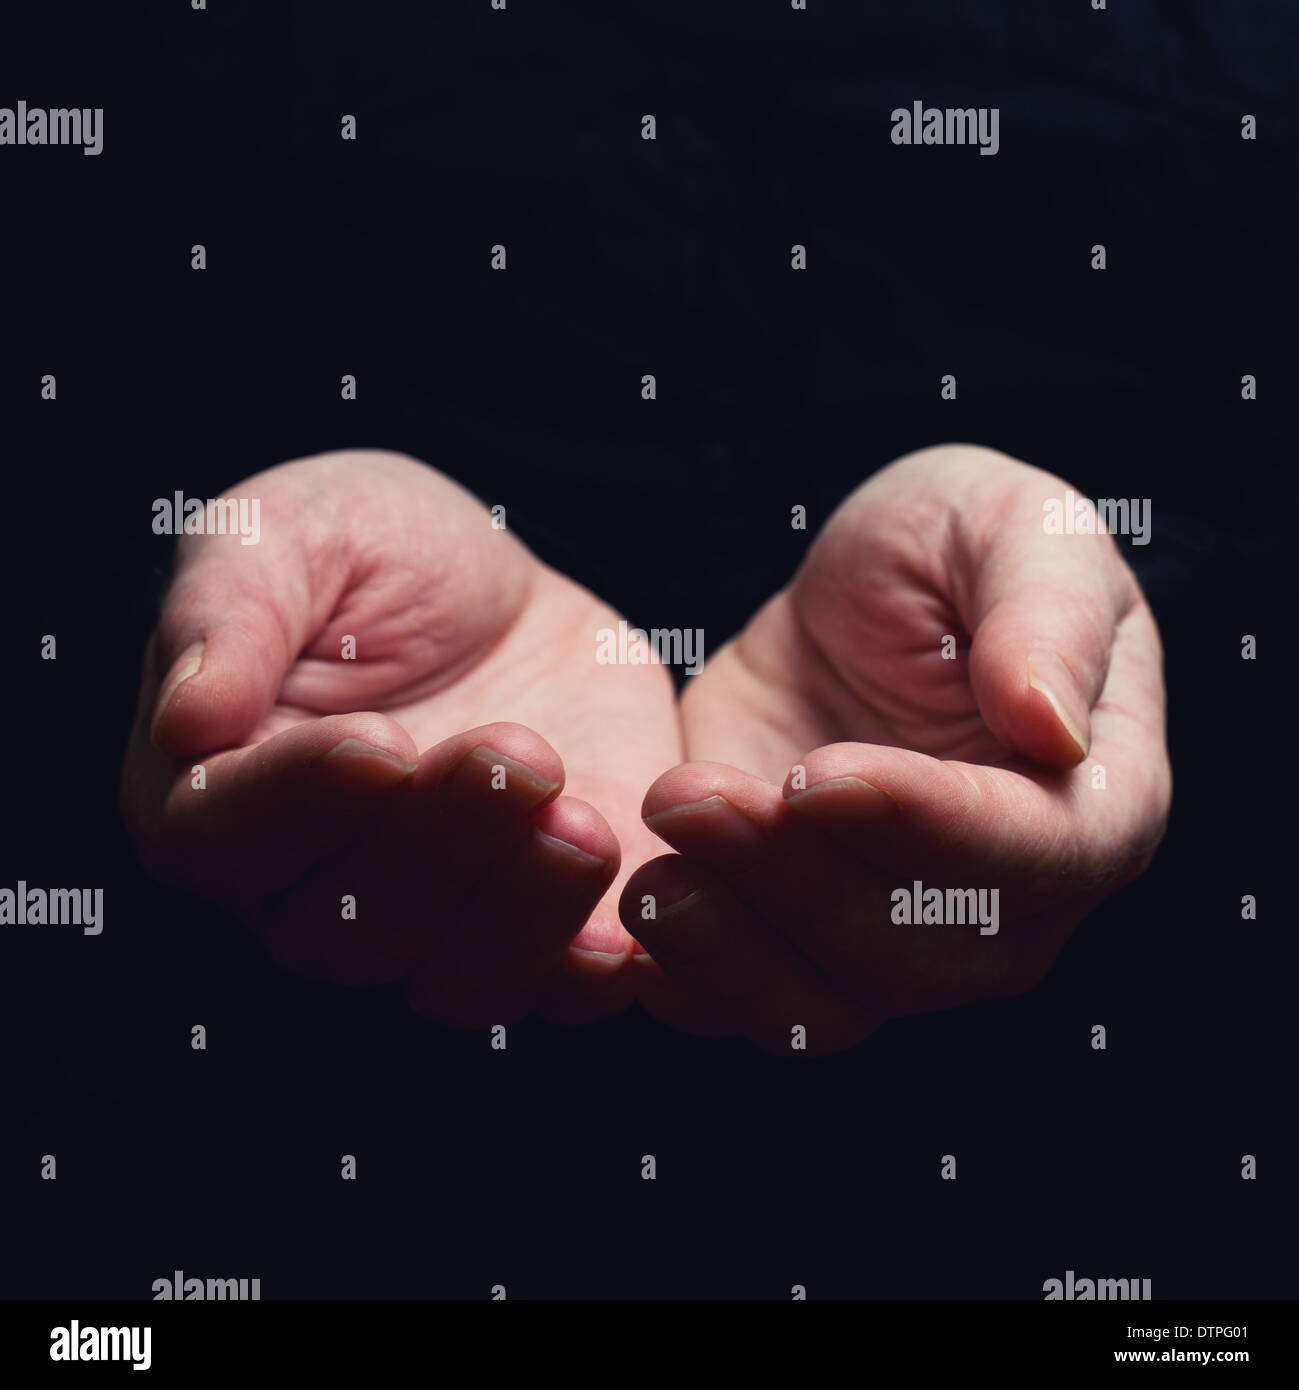 Open hands. Holding, giving, showing concept. Selective focus on fingers. Stock Photo